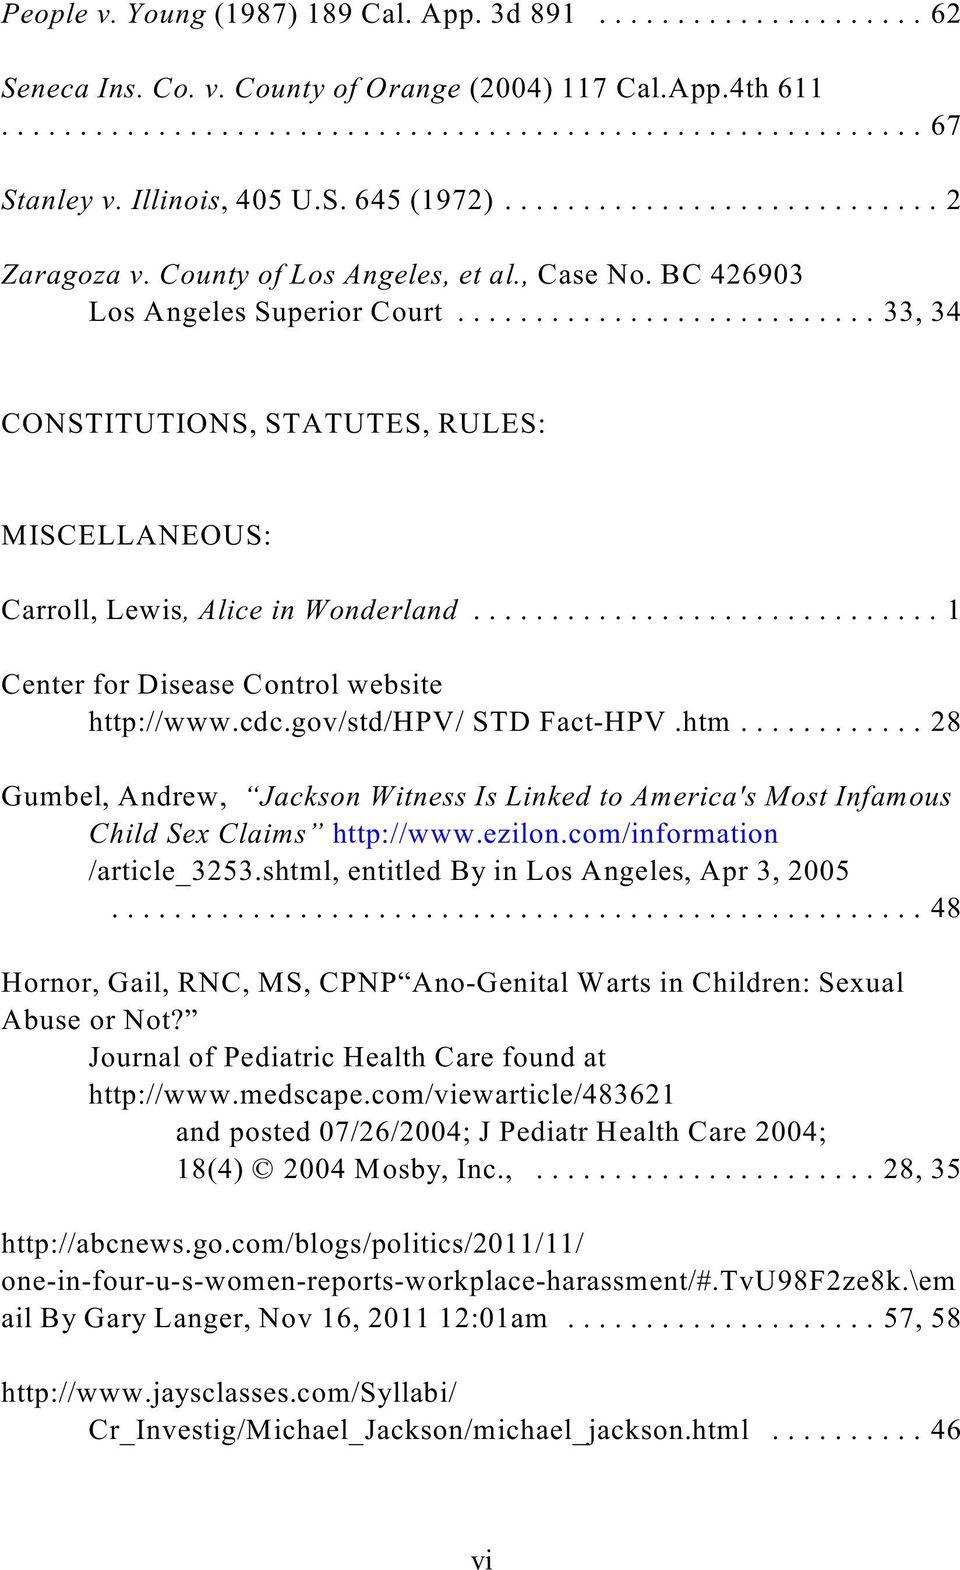 ..1 Center for Disease Control website http://www.cdc.gov/std/hpv/ STD Fact-HPV.htm............ 28 Gumbel, Andrew, Jackson Witness Is Linked to America's Most Infamous Child Sex Claims http://www.